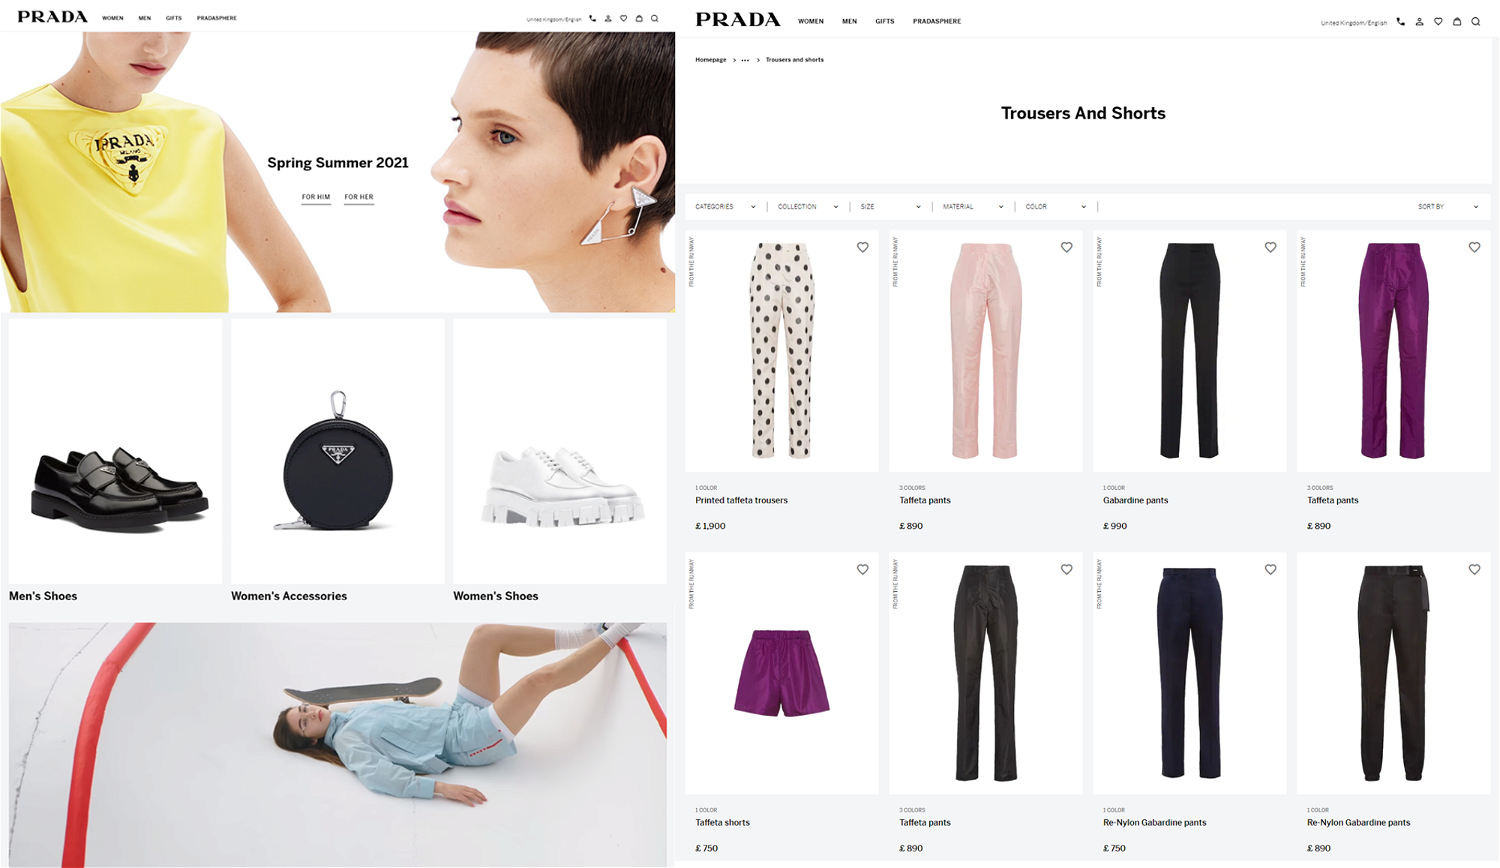 Prada's desktop website. Home page (left) and category page (right)